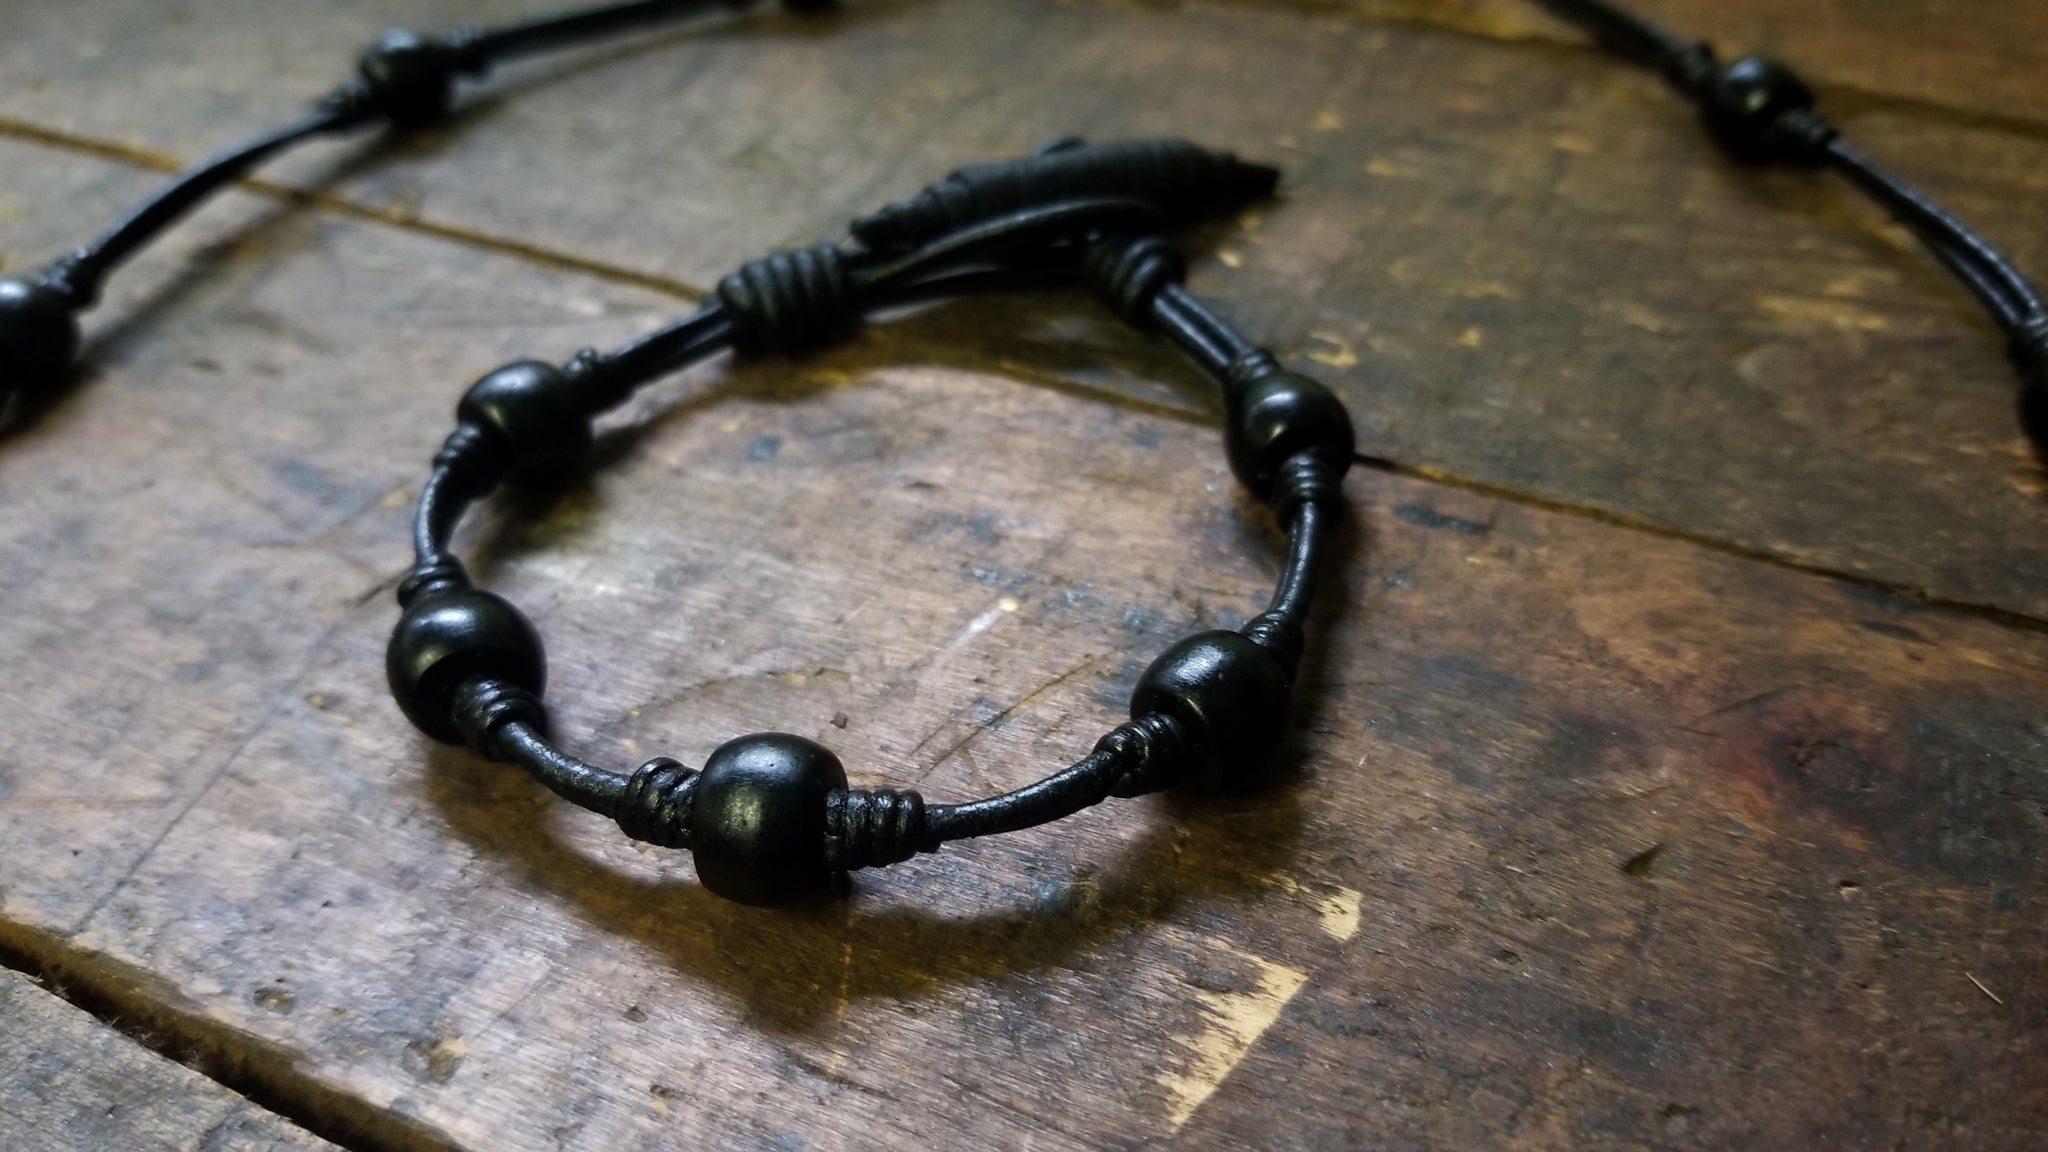 Chuma knot bracelet; black leather cord with black onyx African Trade Beads, Bison Leather Button and Loop Clasp